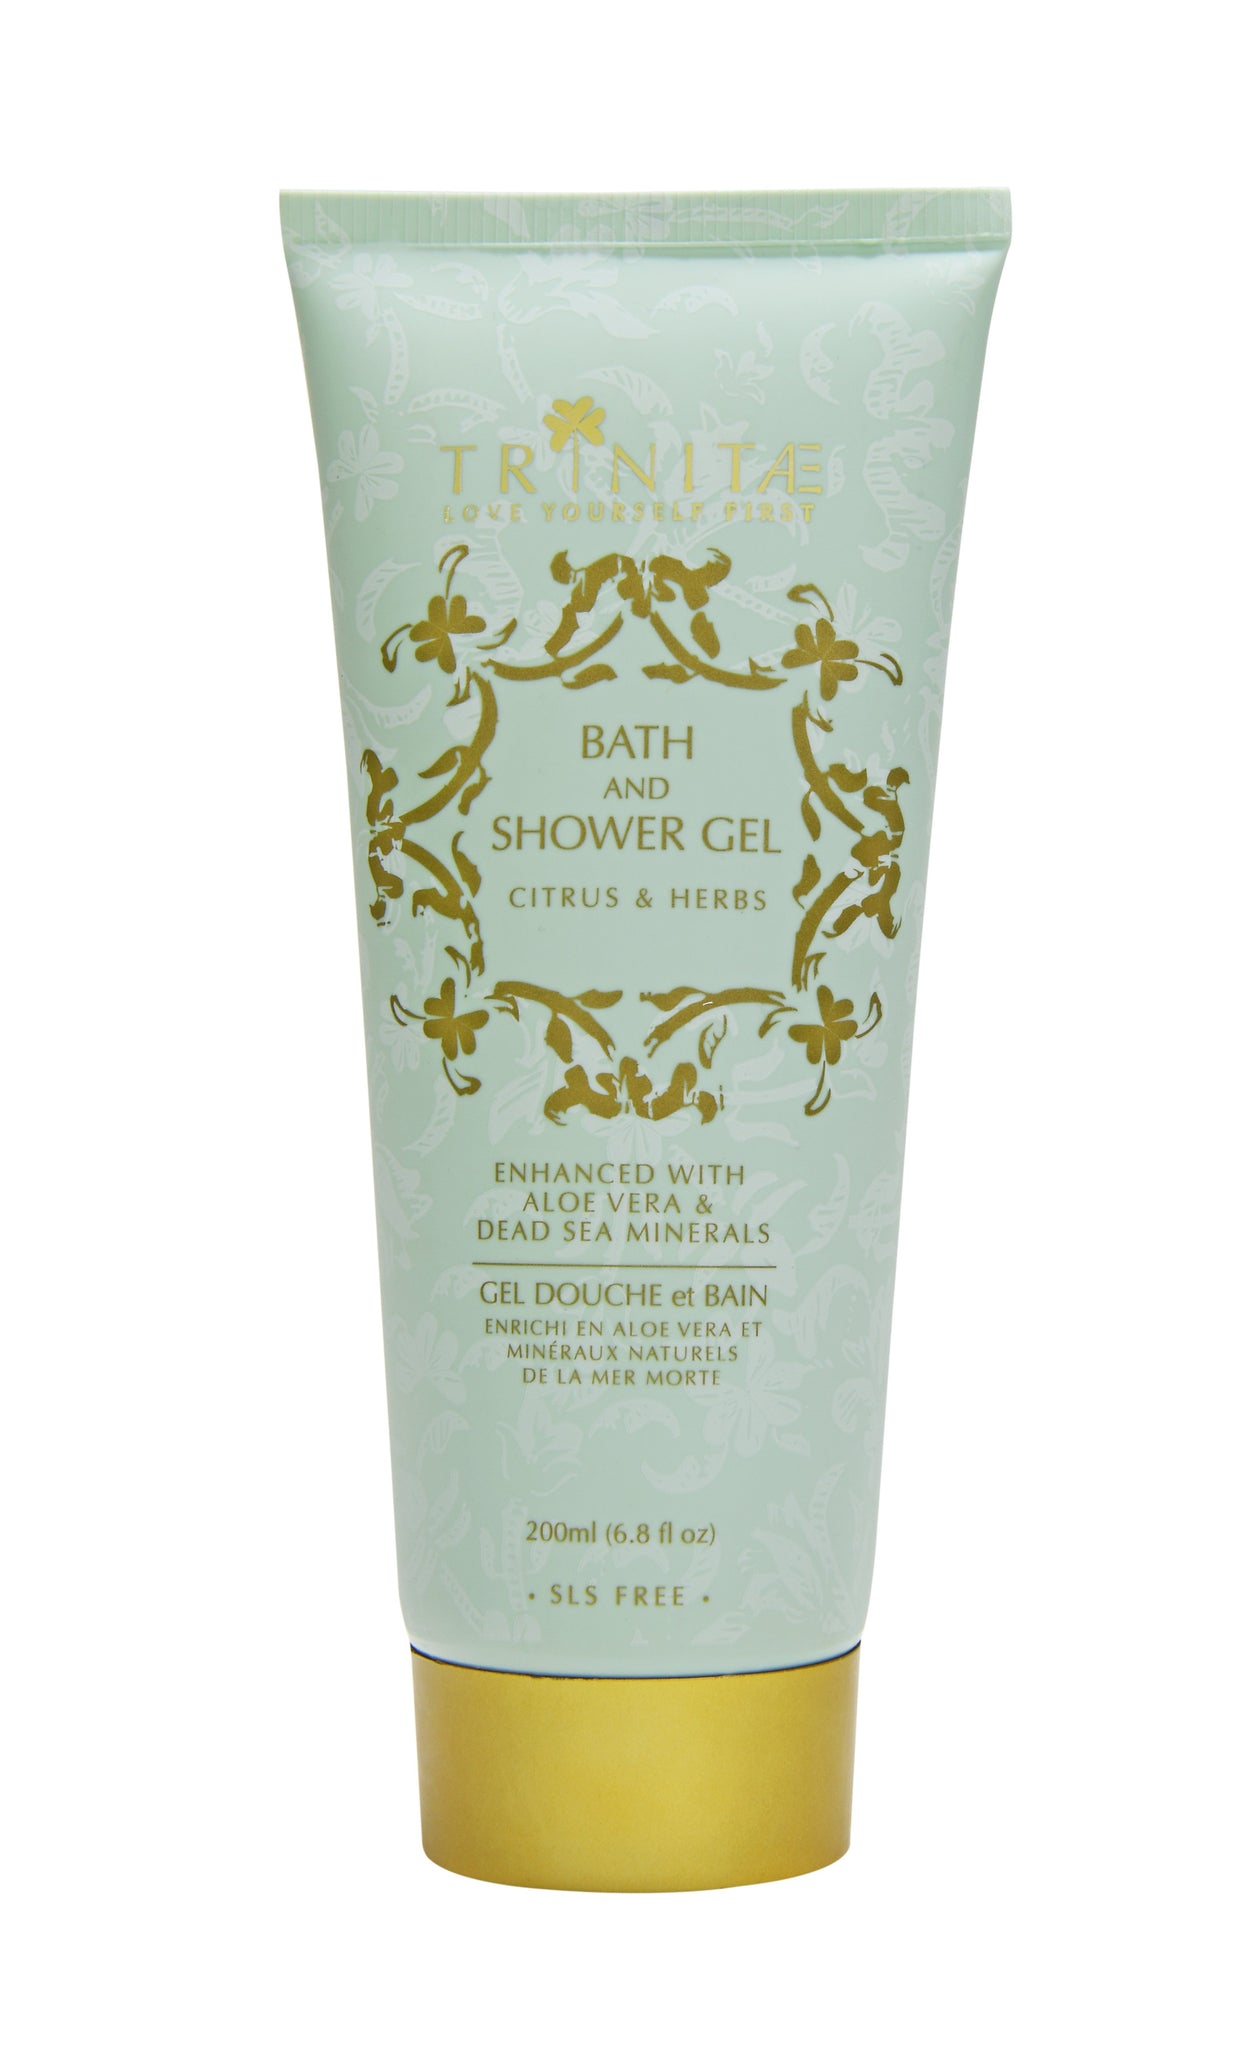 Bath and Shower Gel Citrus & Herbs Enriched With Aloe Vera & Dead Sea Minerals